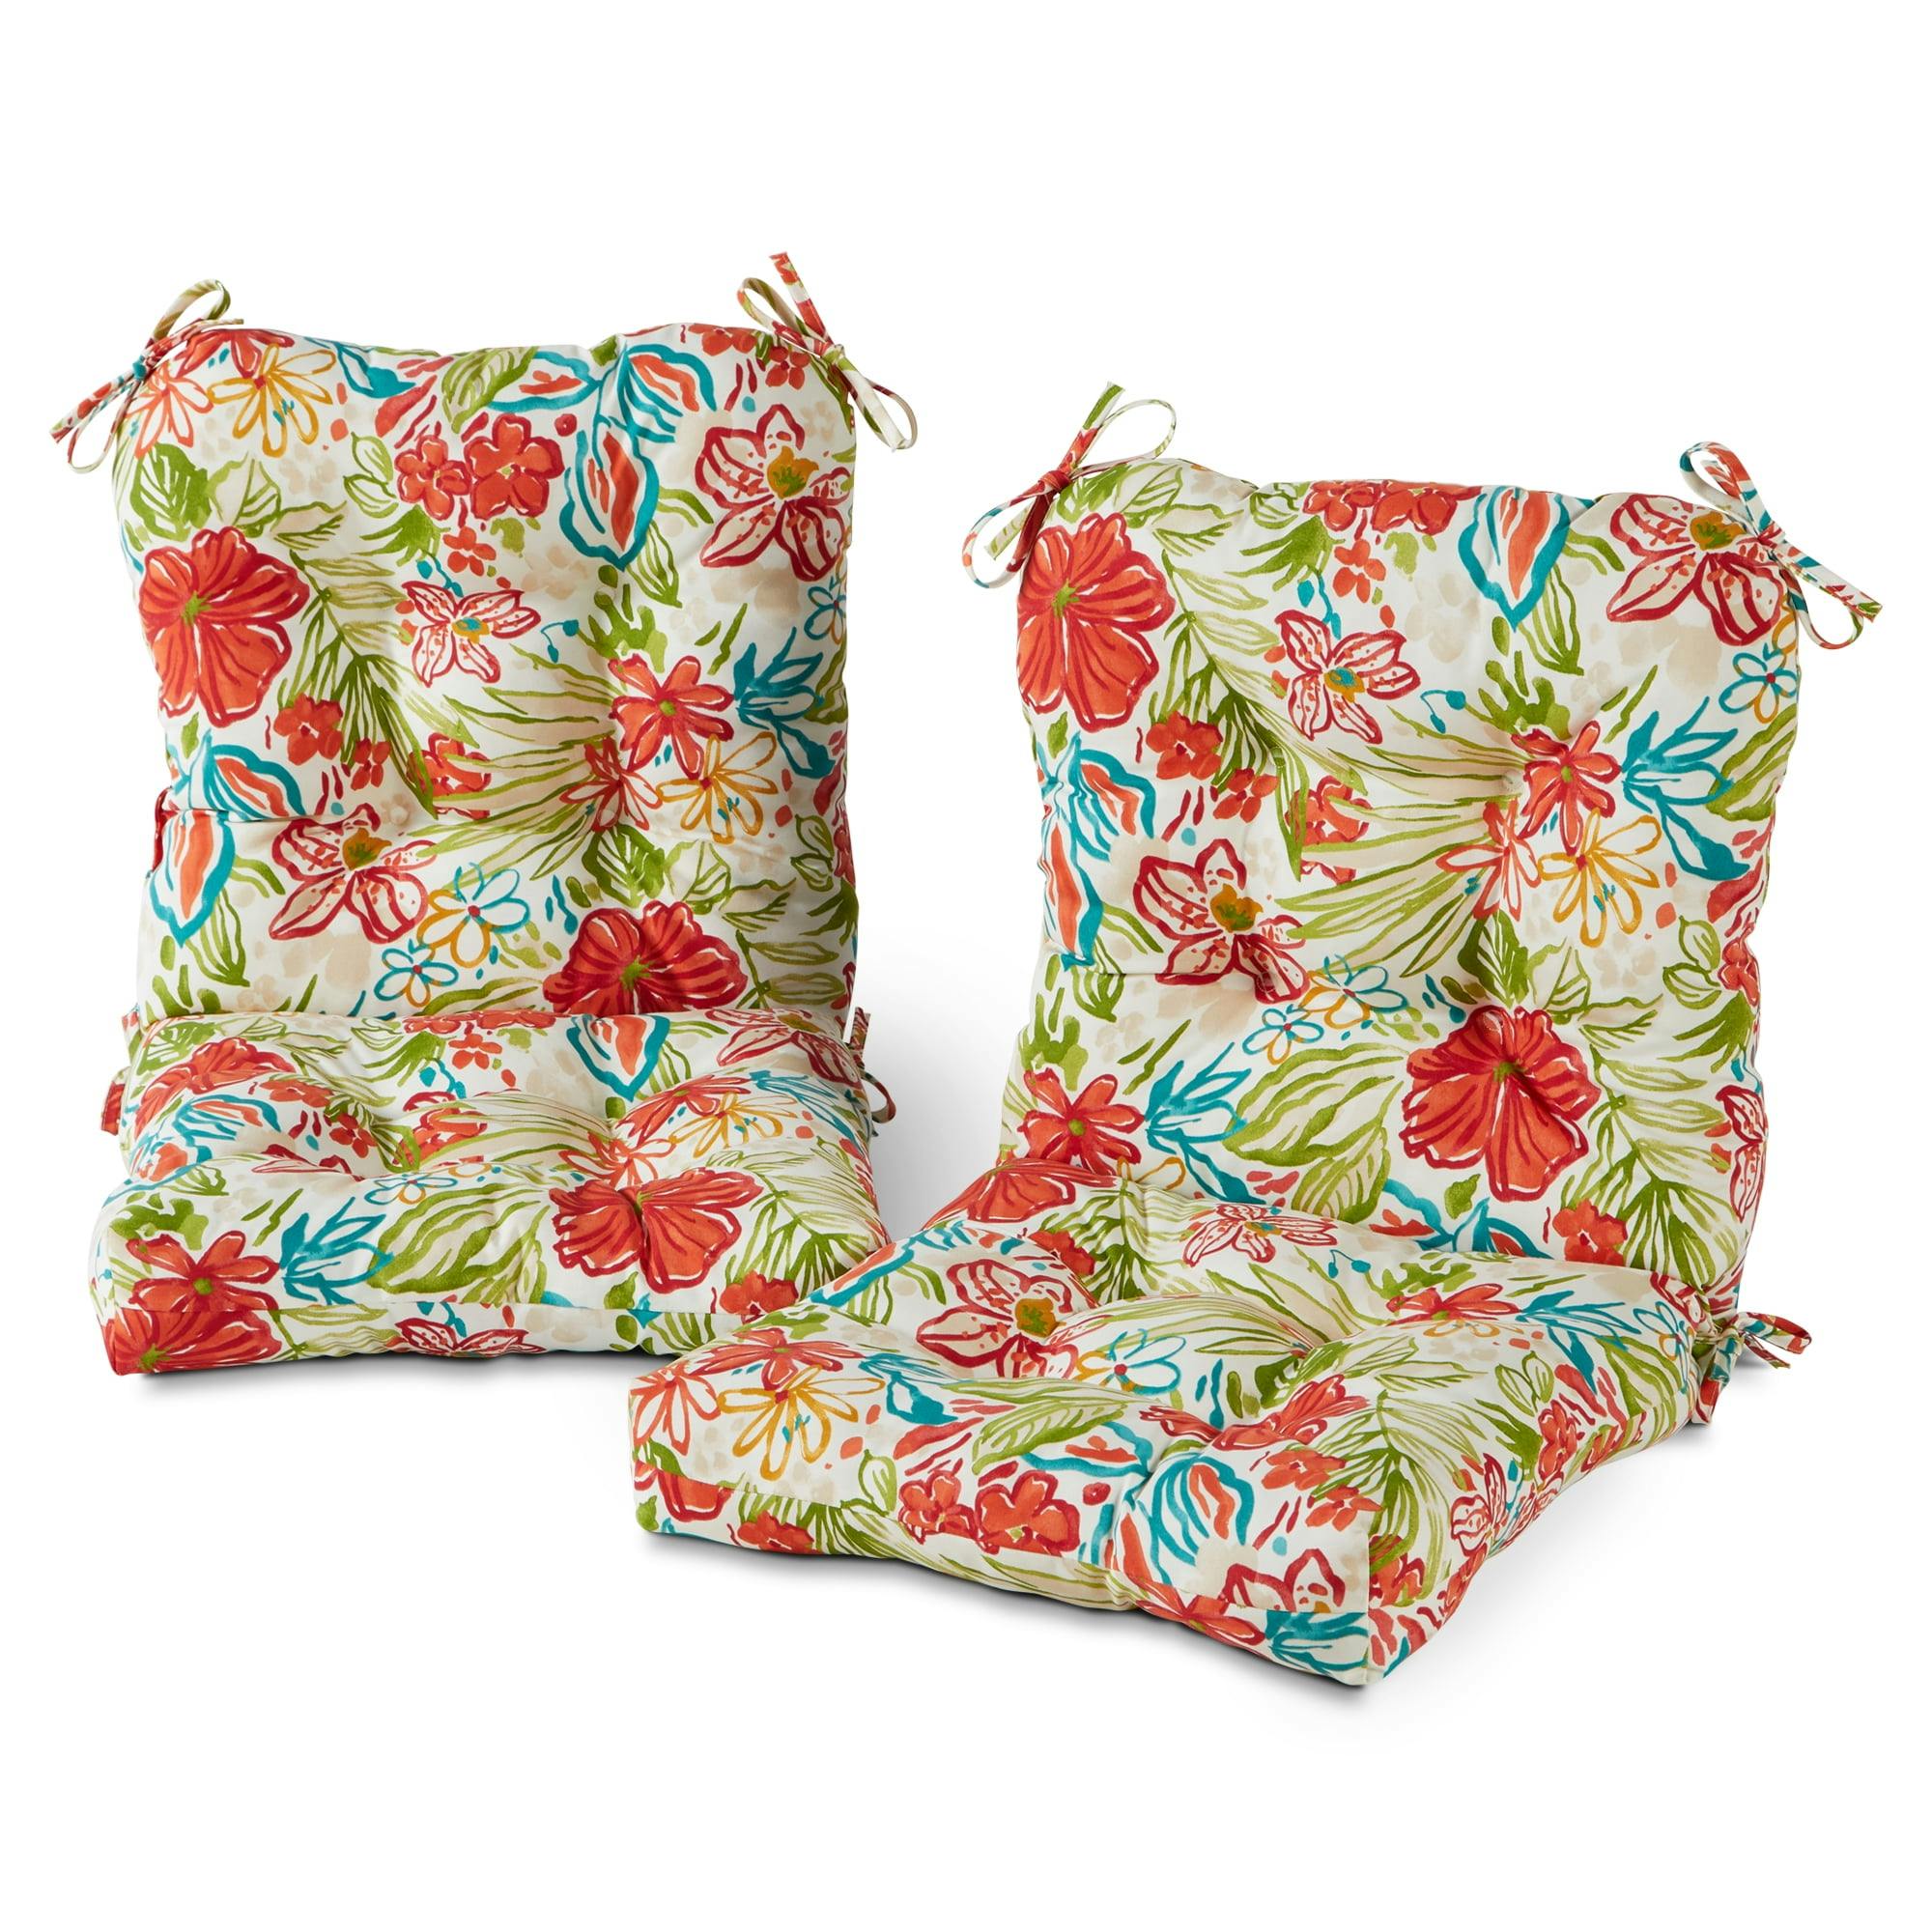 Breeze Floral Outdoor Tufted Chair Cushion 42" x 21" Set of 2